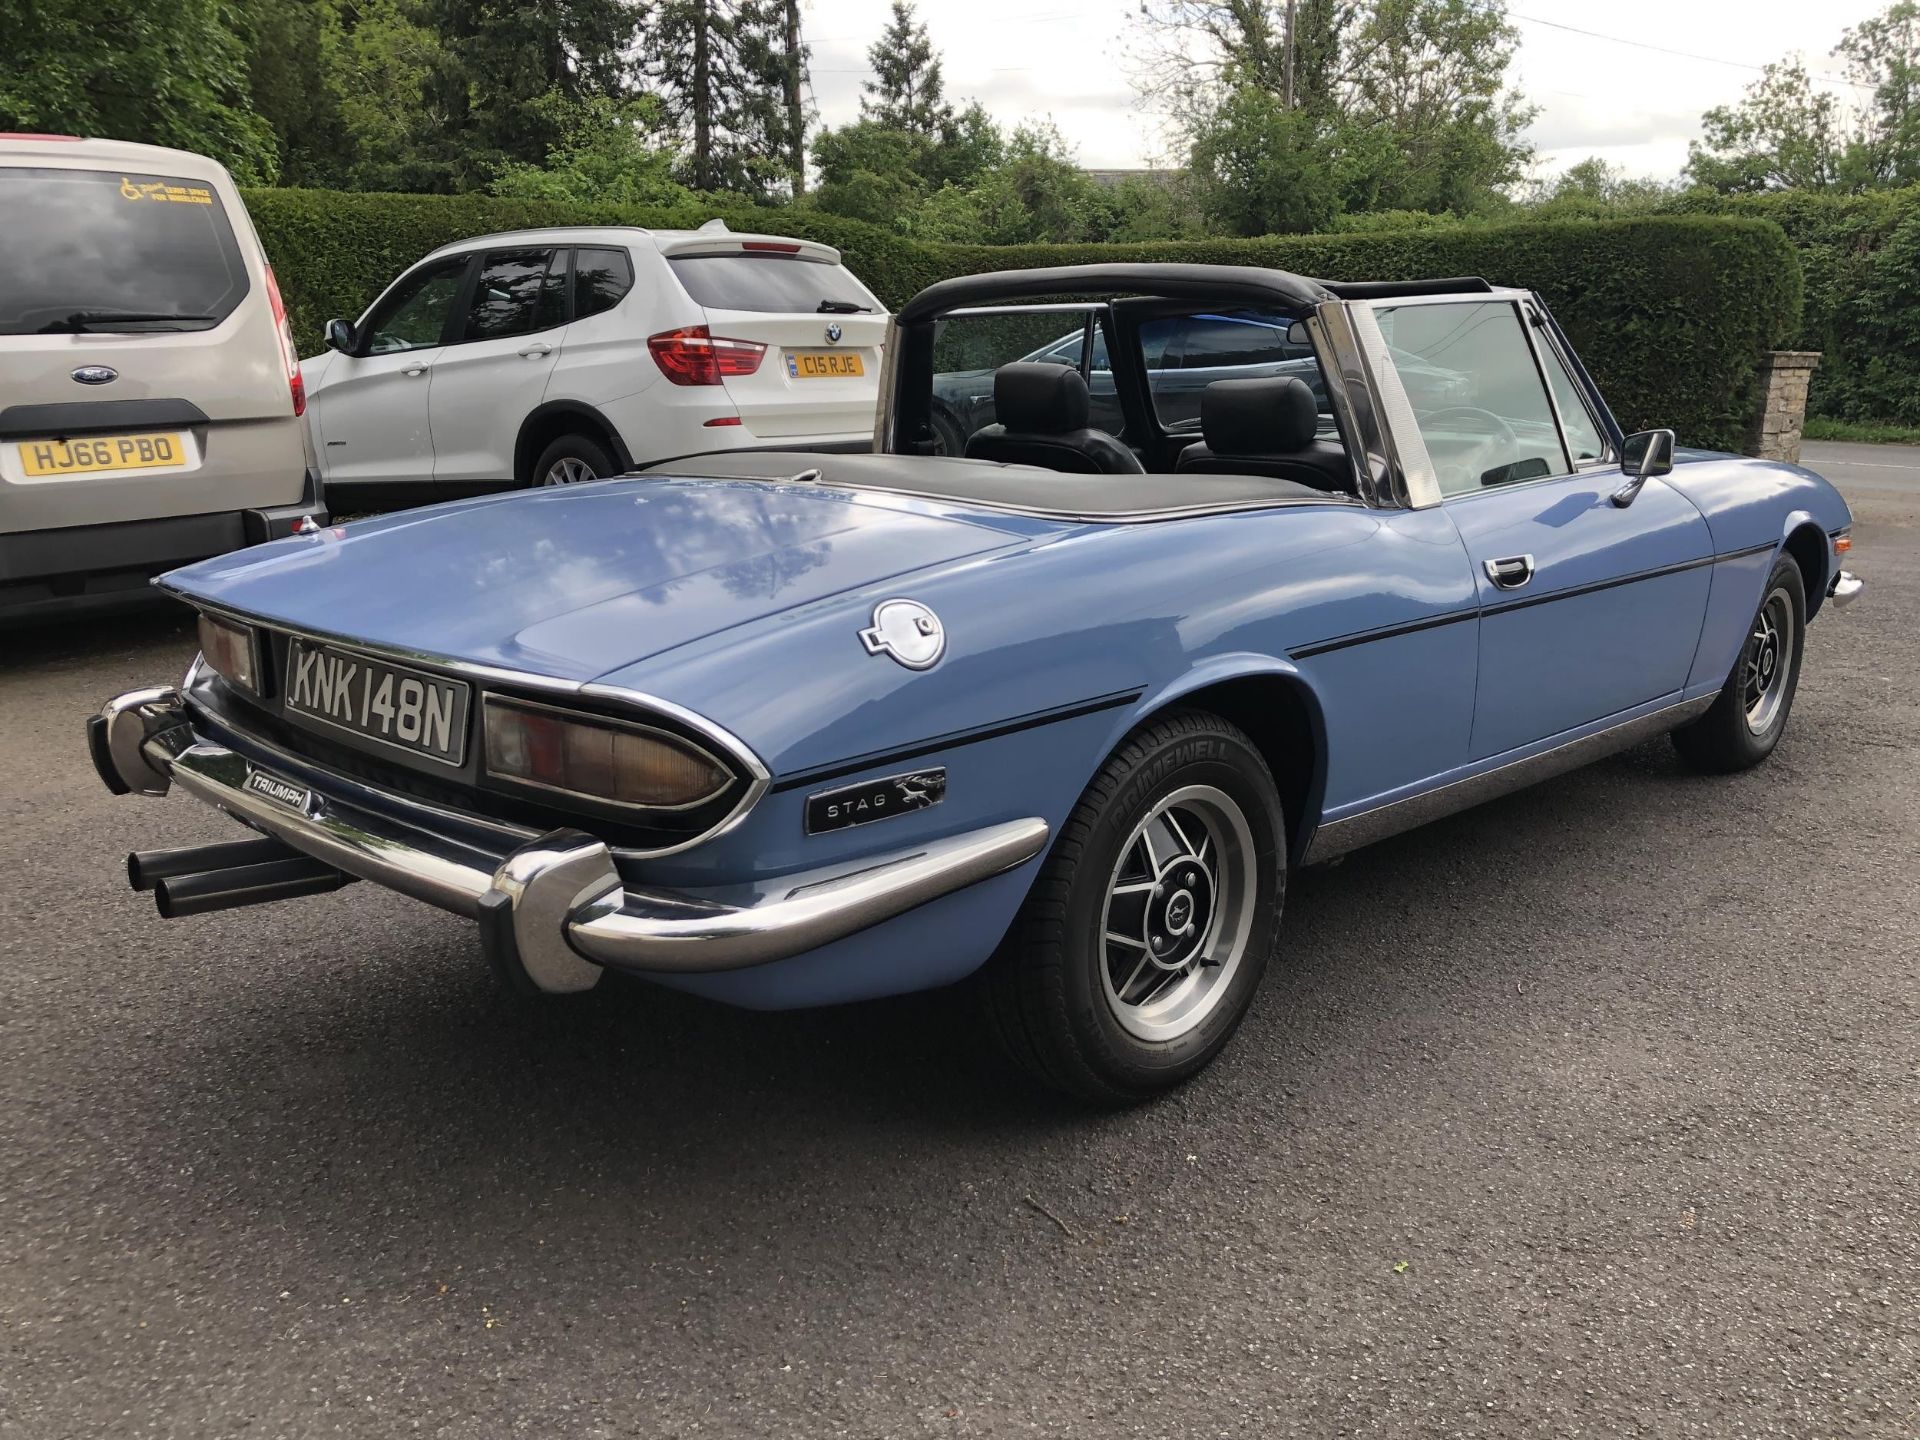 1975 Triumph Stag Registration number KNK 148N French blue with a black interior Automatic Gearbox - Image 2 of 57